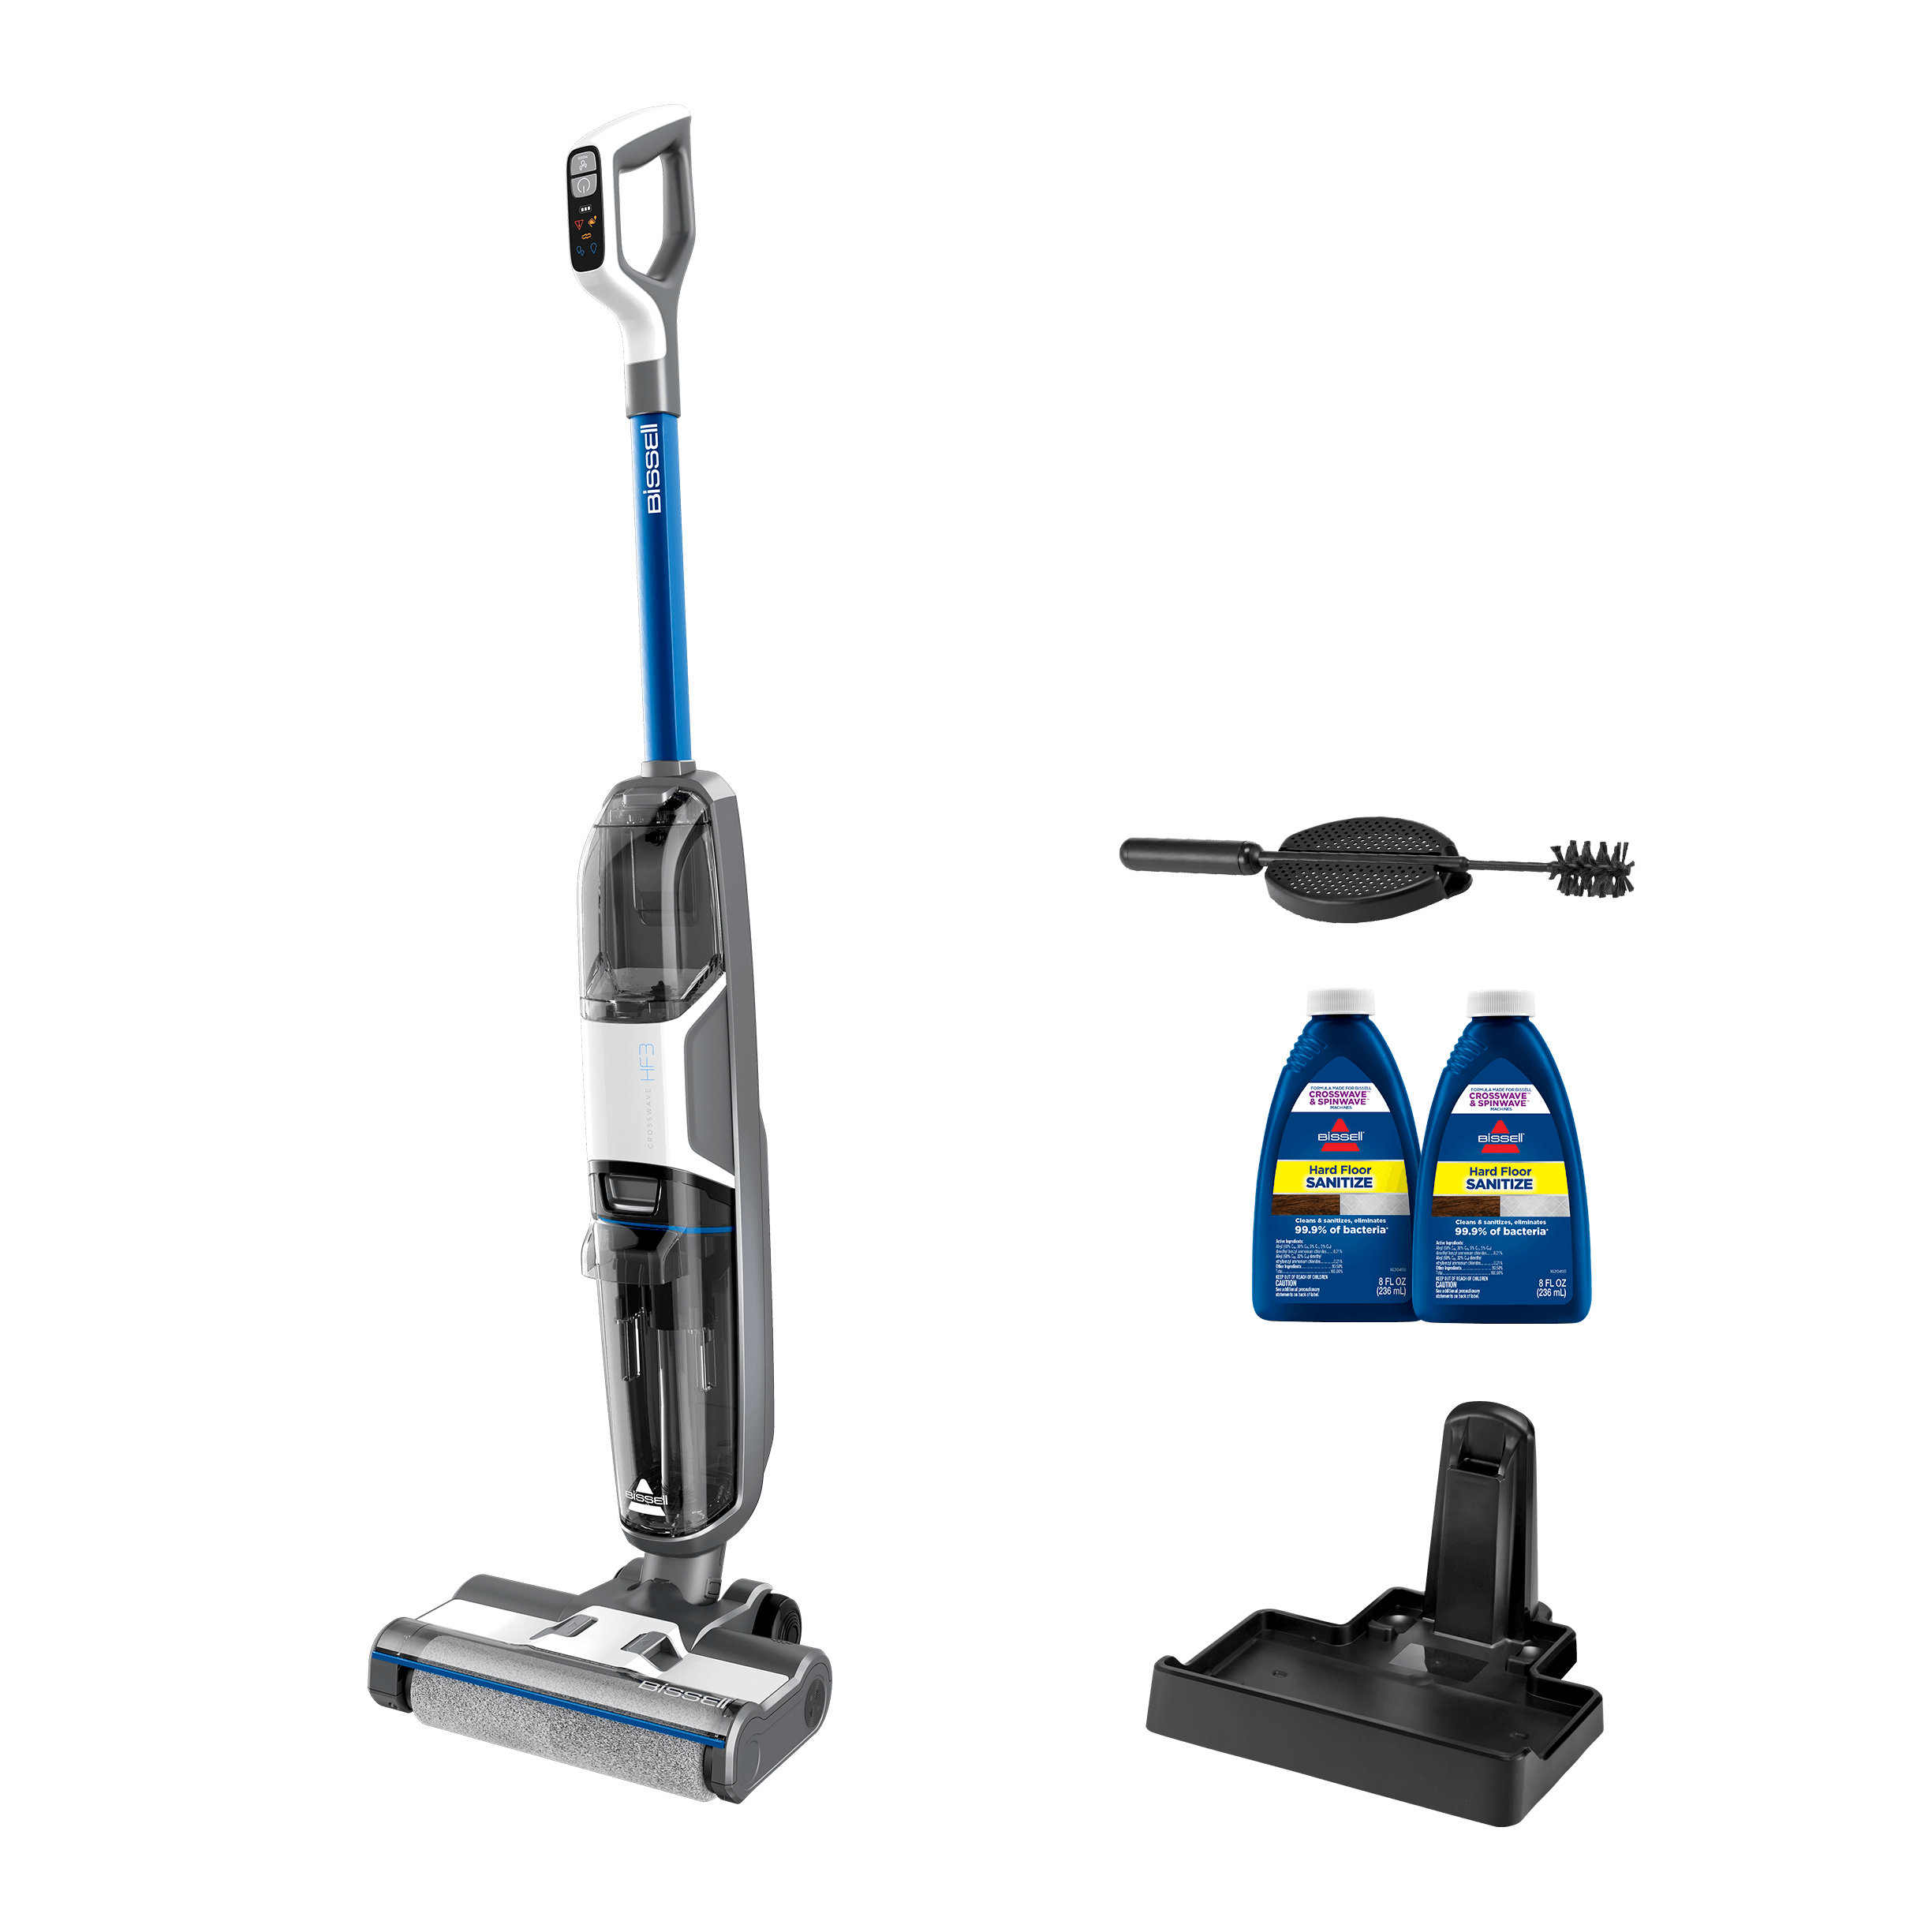 Dreame-H12 Pro Household Vacuum Cleaner,Wet and Dry  Cleaning,Wireless,Vertical,Used for Cleaning Floors,Manual,Intelligent